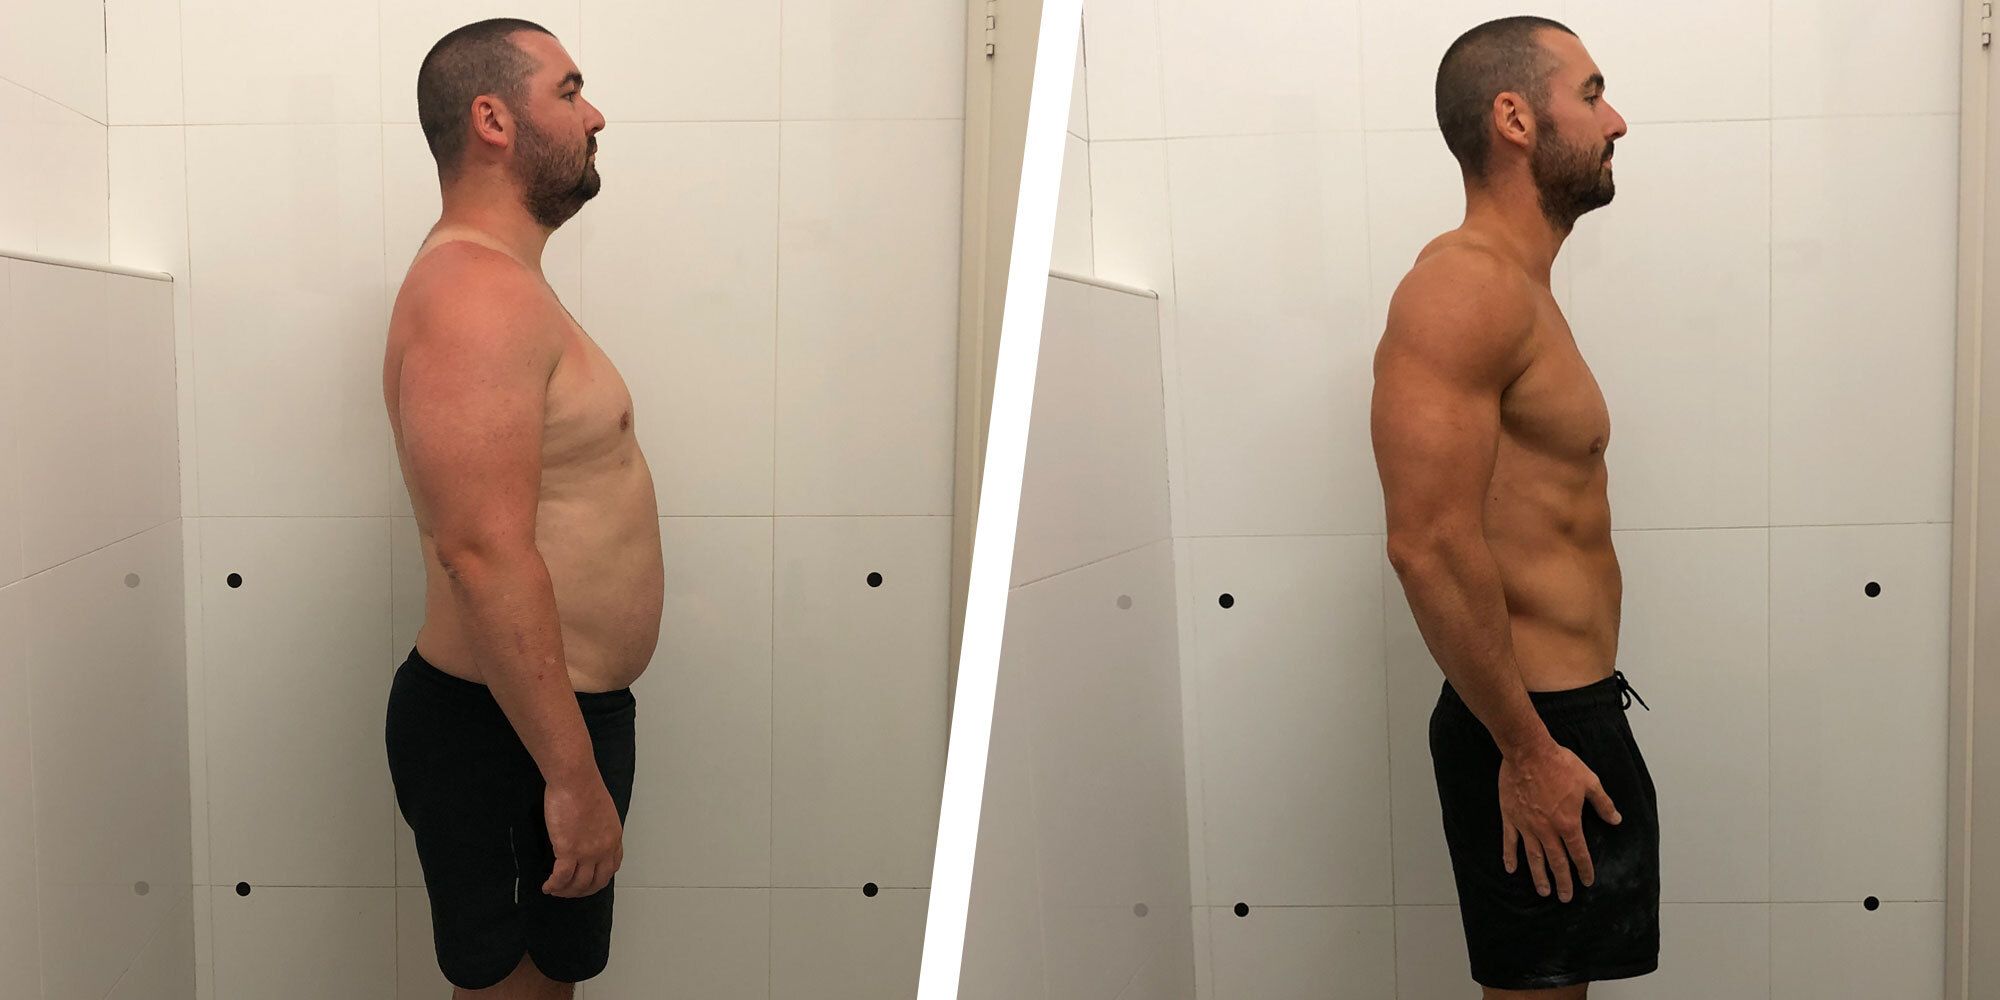 How This Man Lost 70 Pounds and Got Shredded in 5 Months